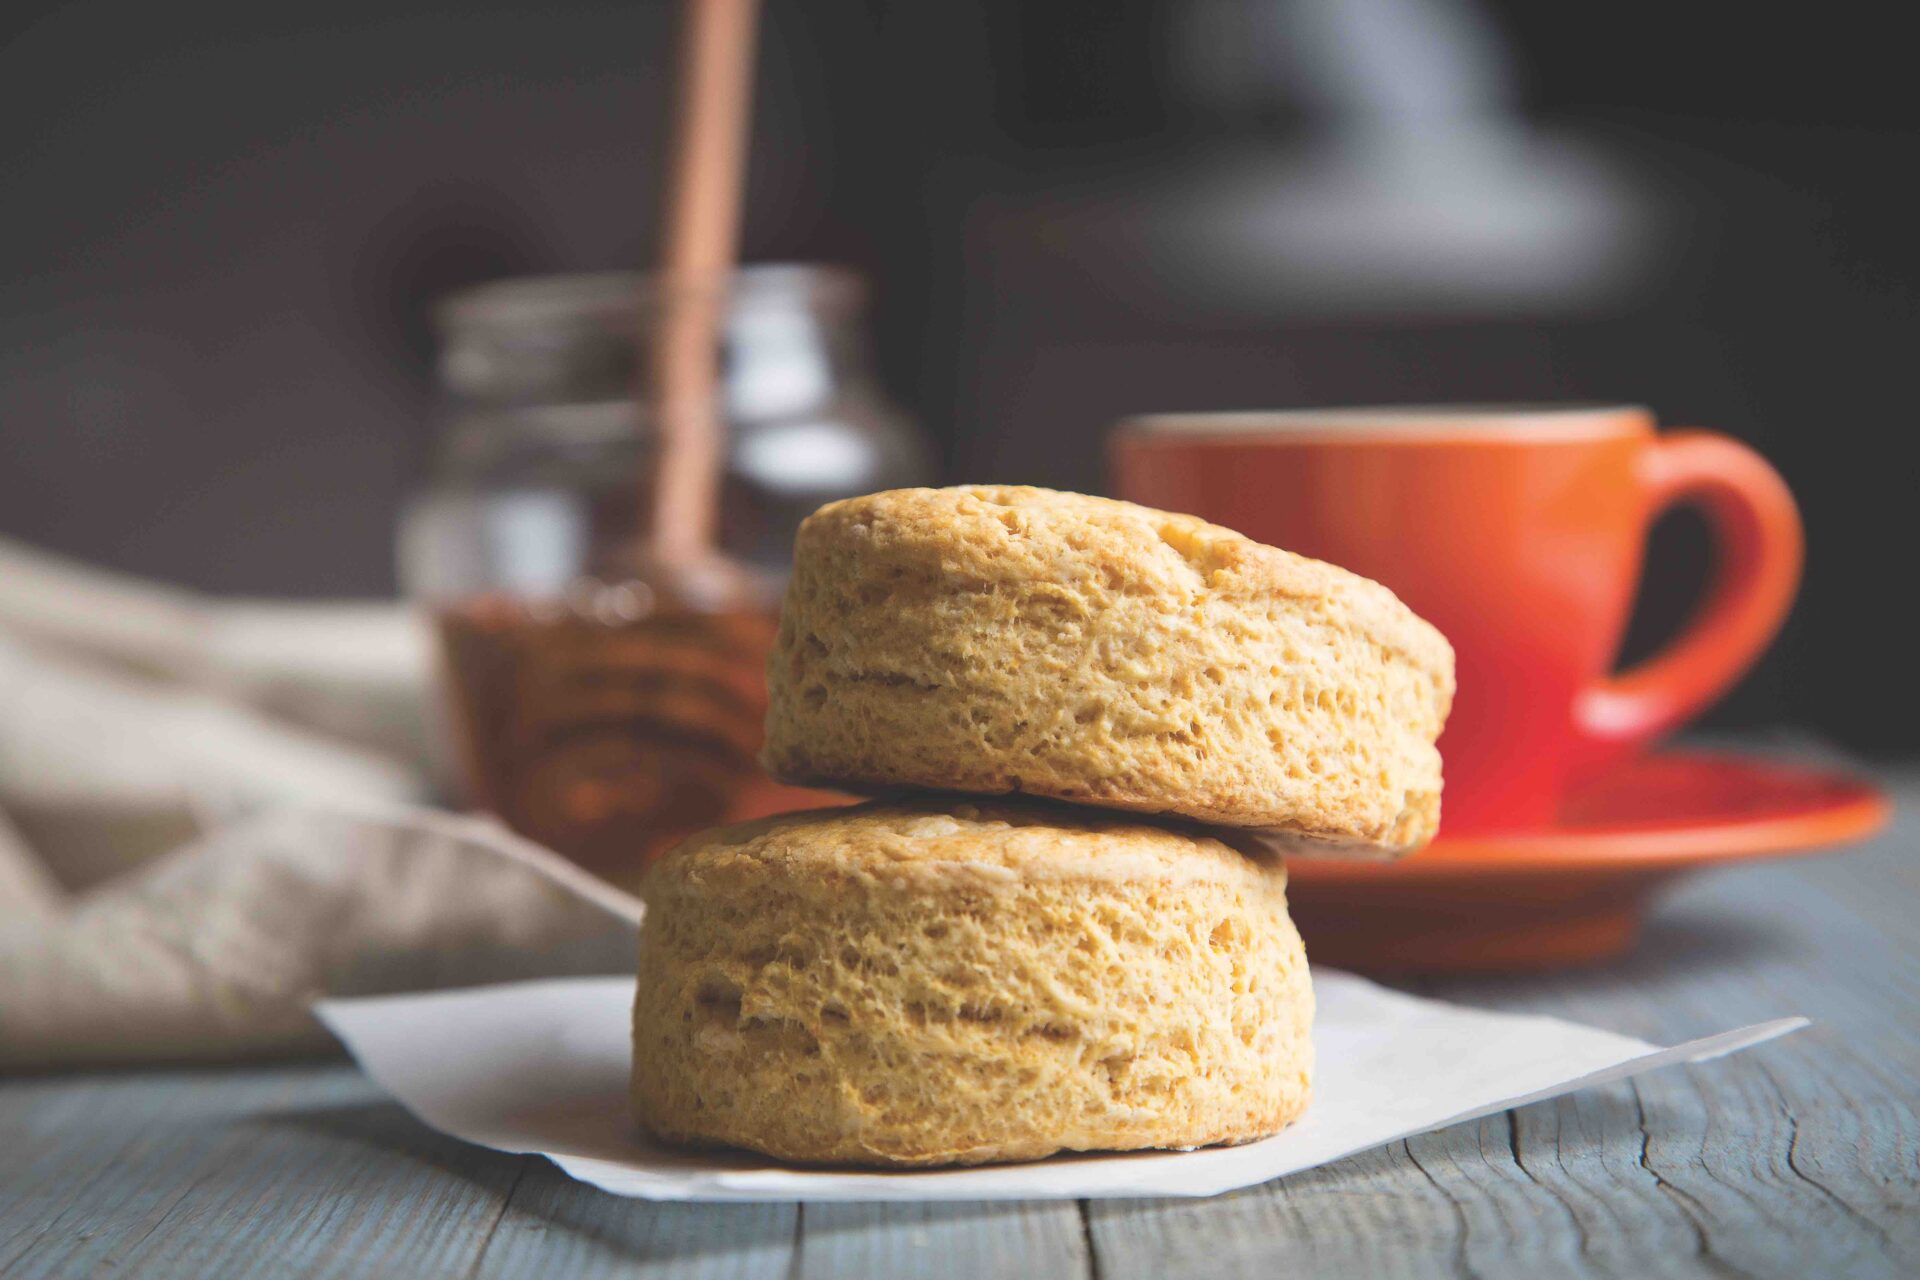 Sweet potato biscuits, one of Cheryl Day's brunch recipes, an orange cup of coffee and honey lie in the background